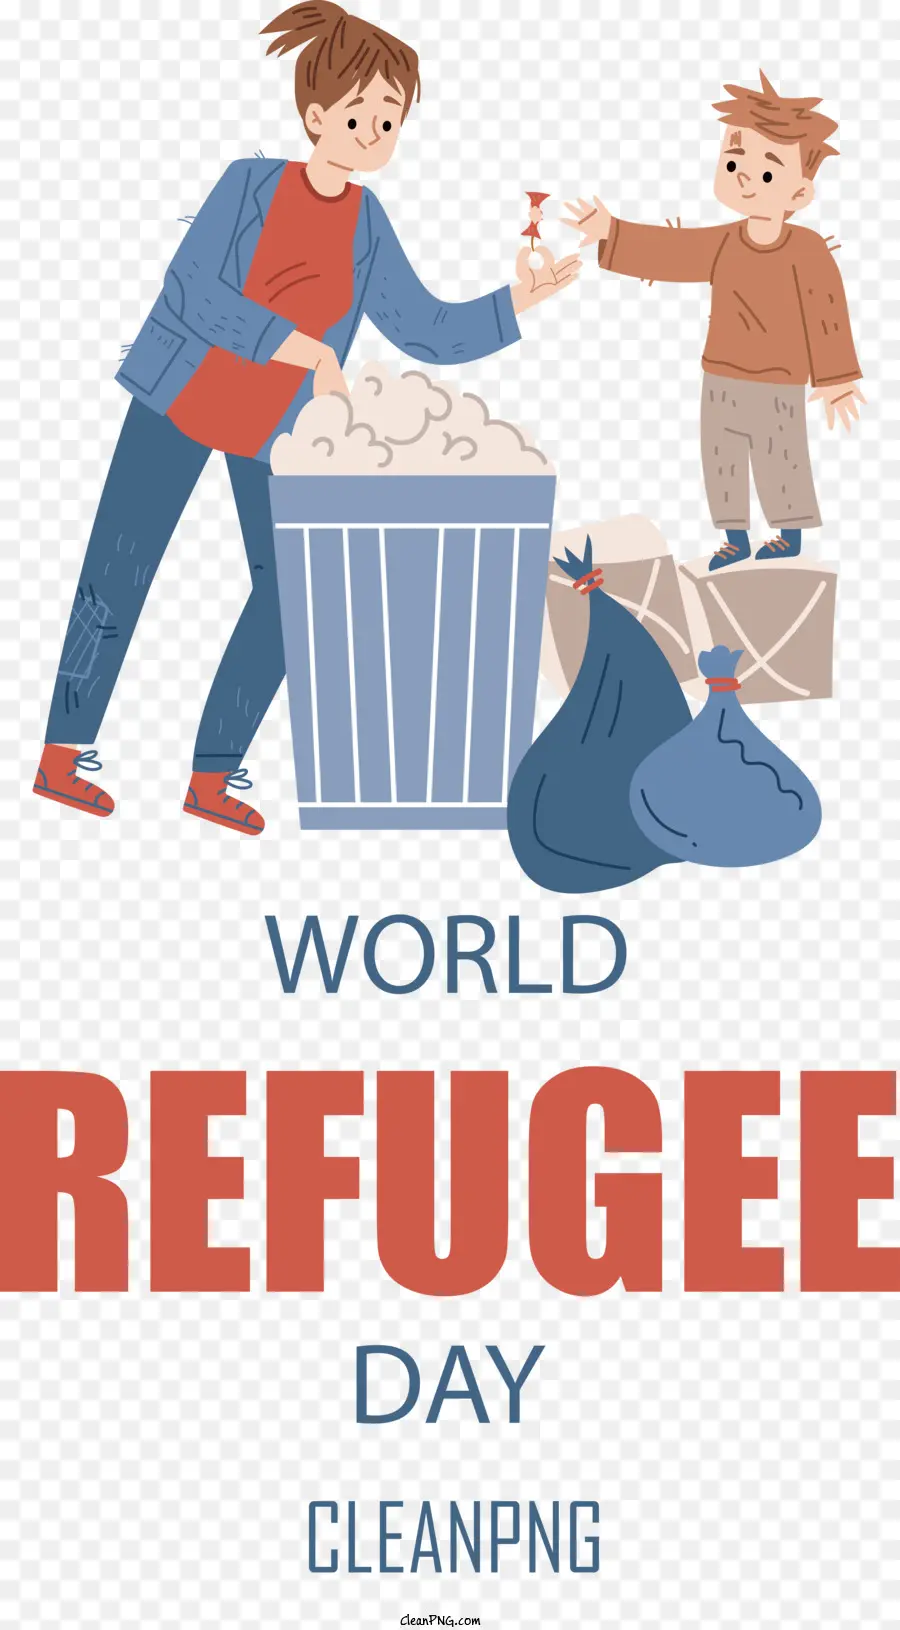 world refugee day awareness day for refugees anti-discrimination day world refugee day cleaning refugee day